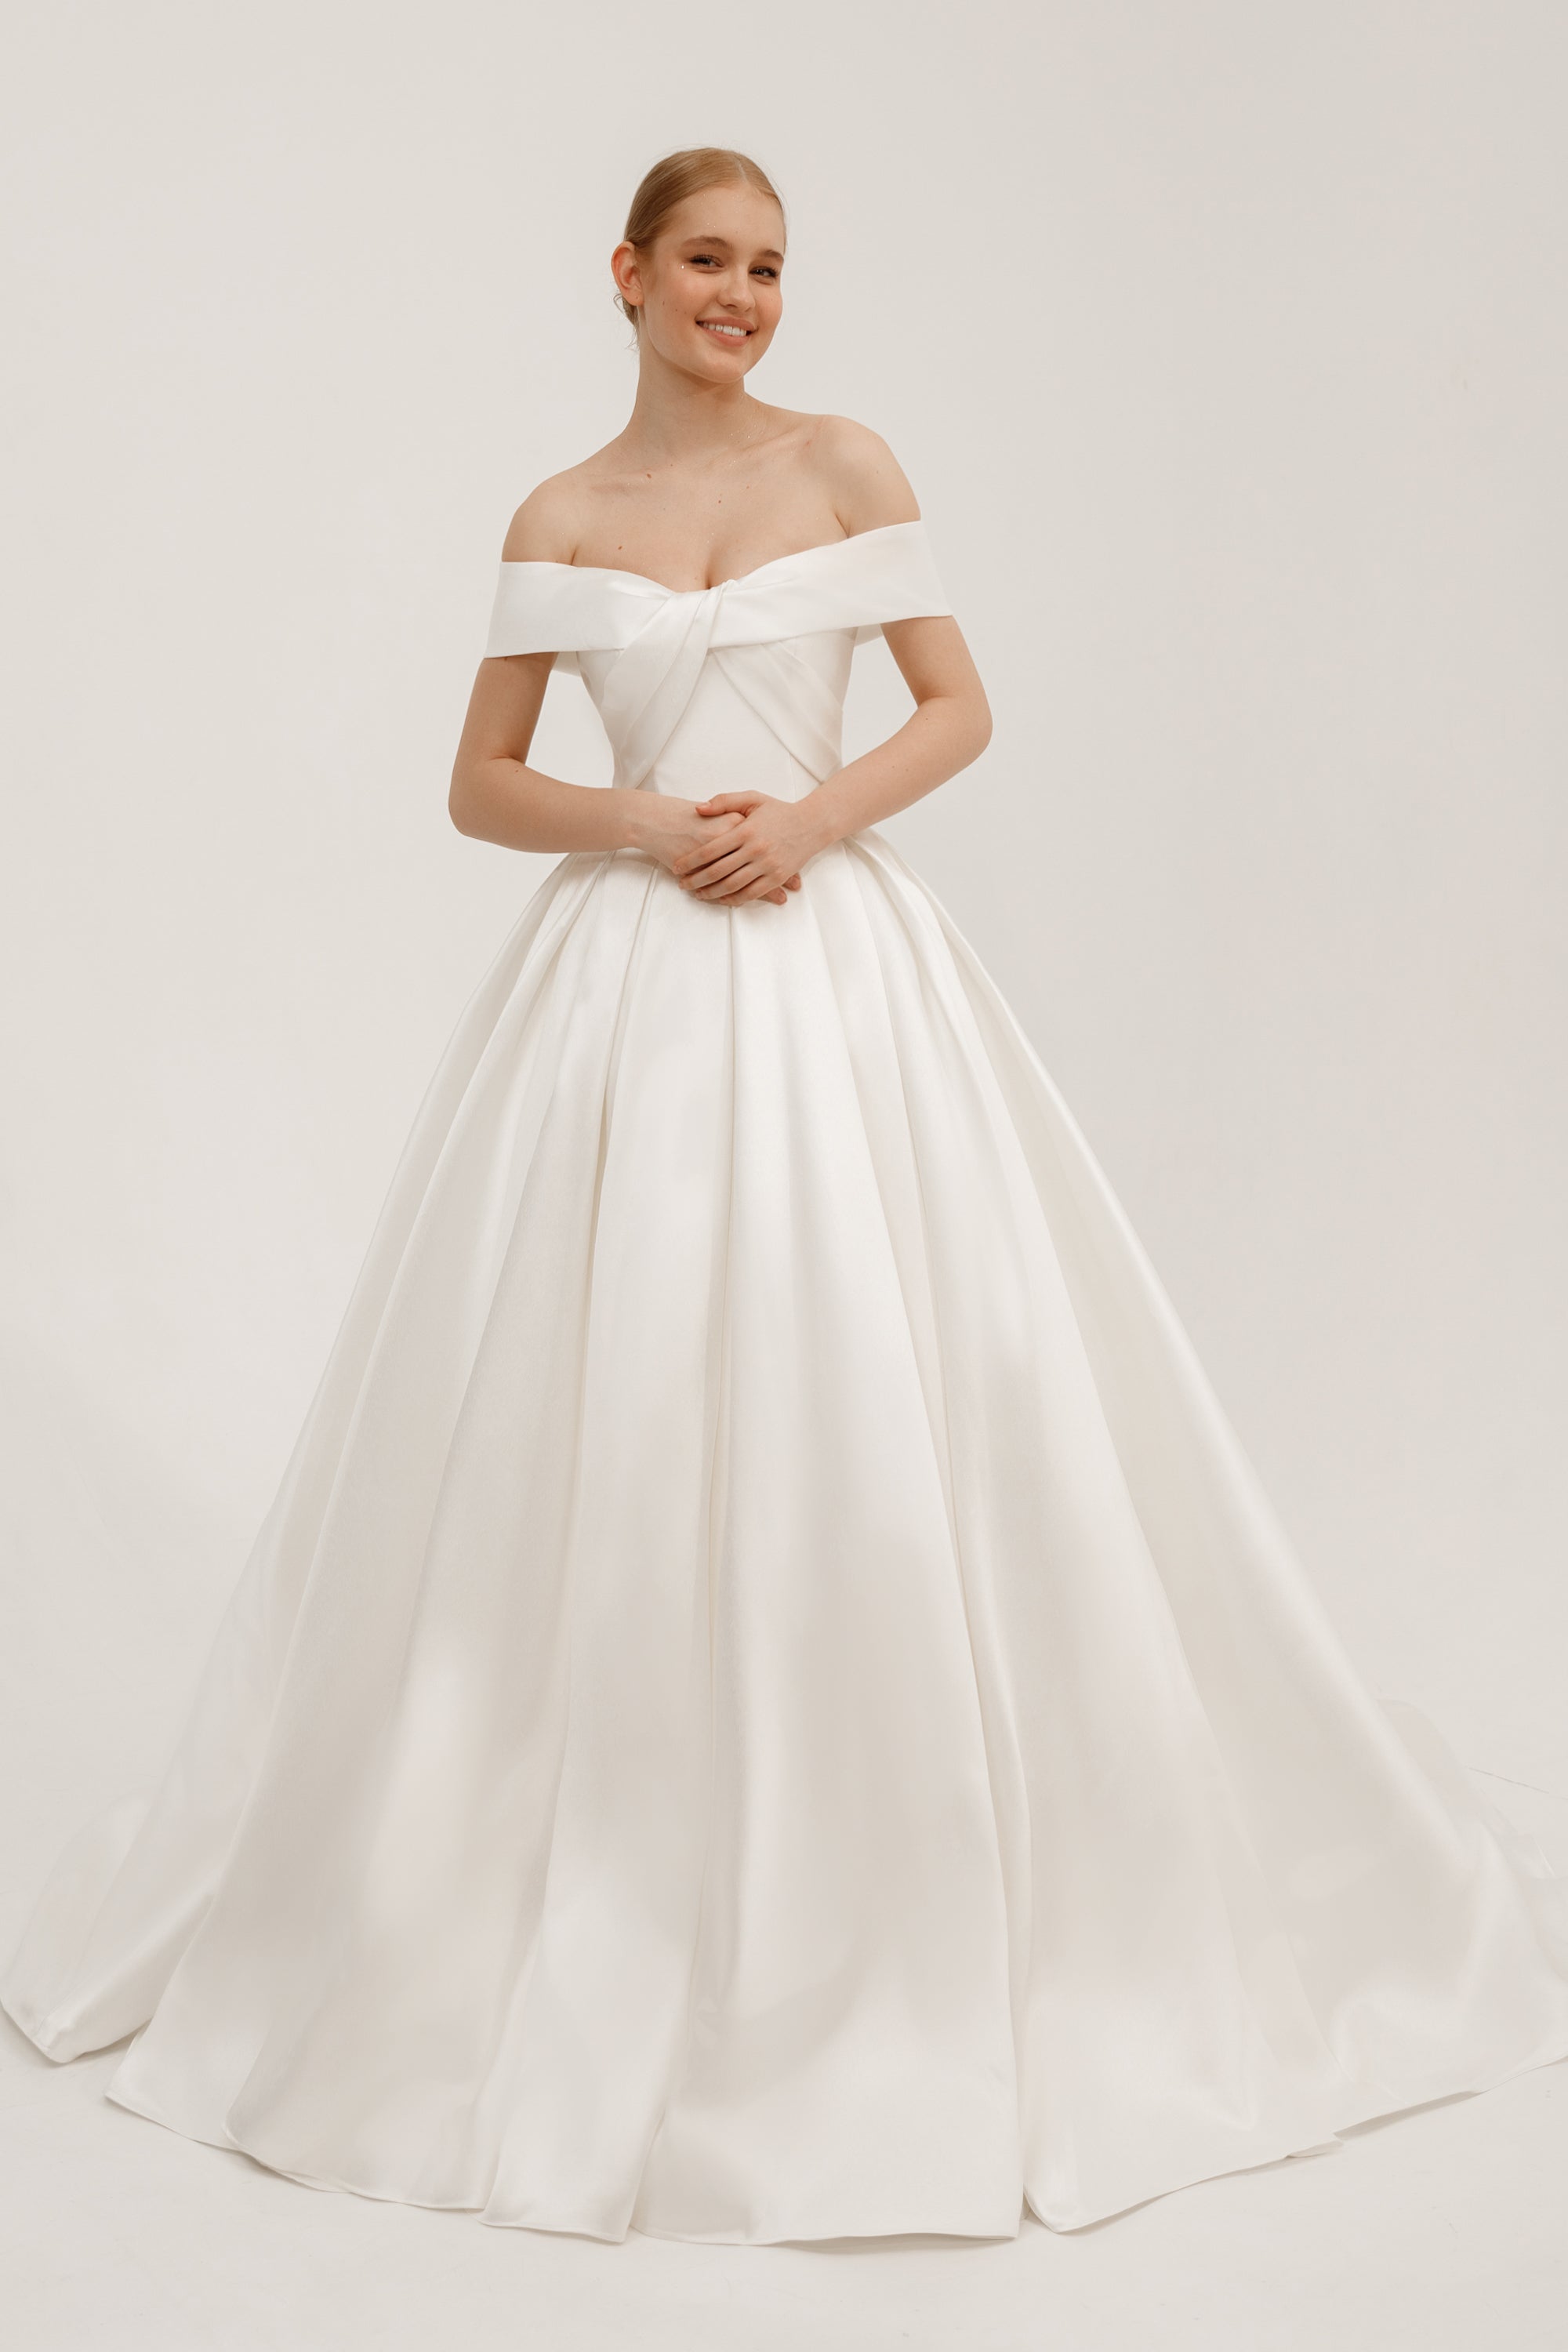 Satin Wedding Dress with Bow on Back: Your Dream Bridal Gown with a ...